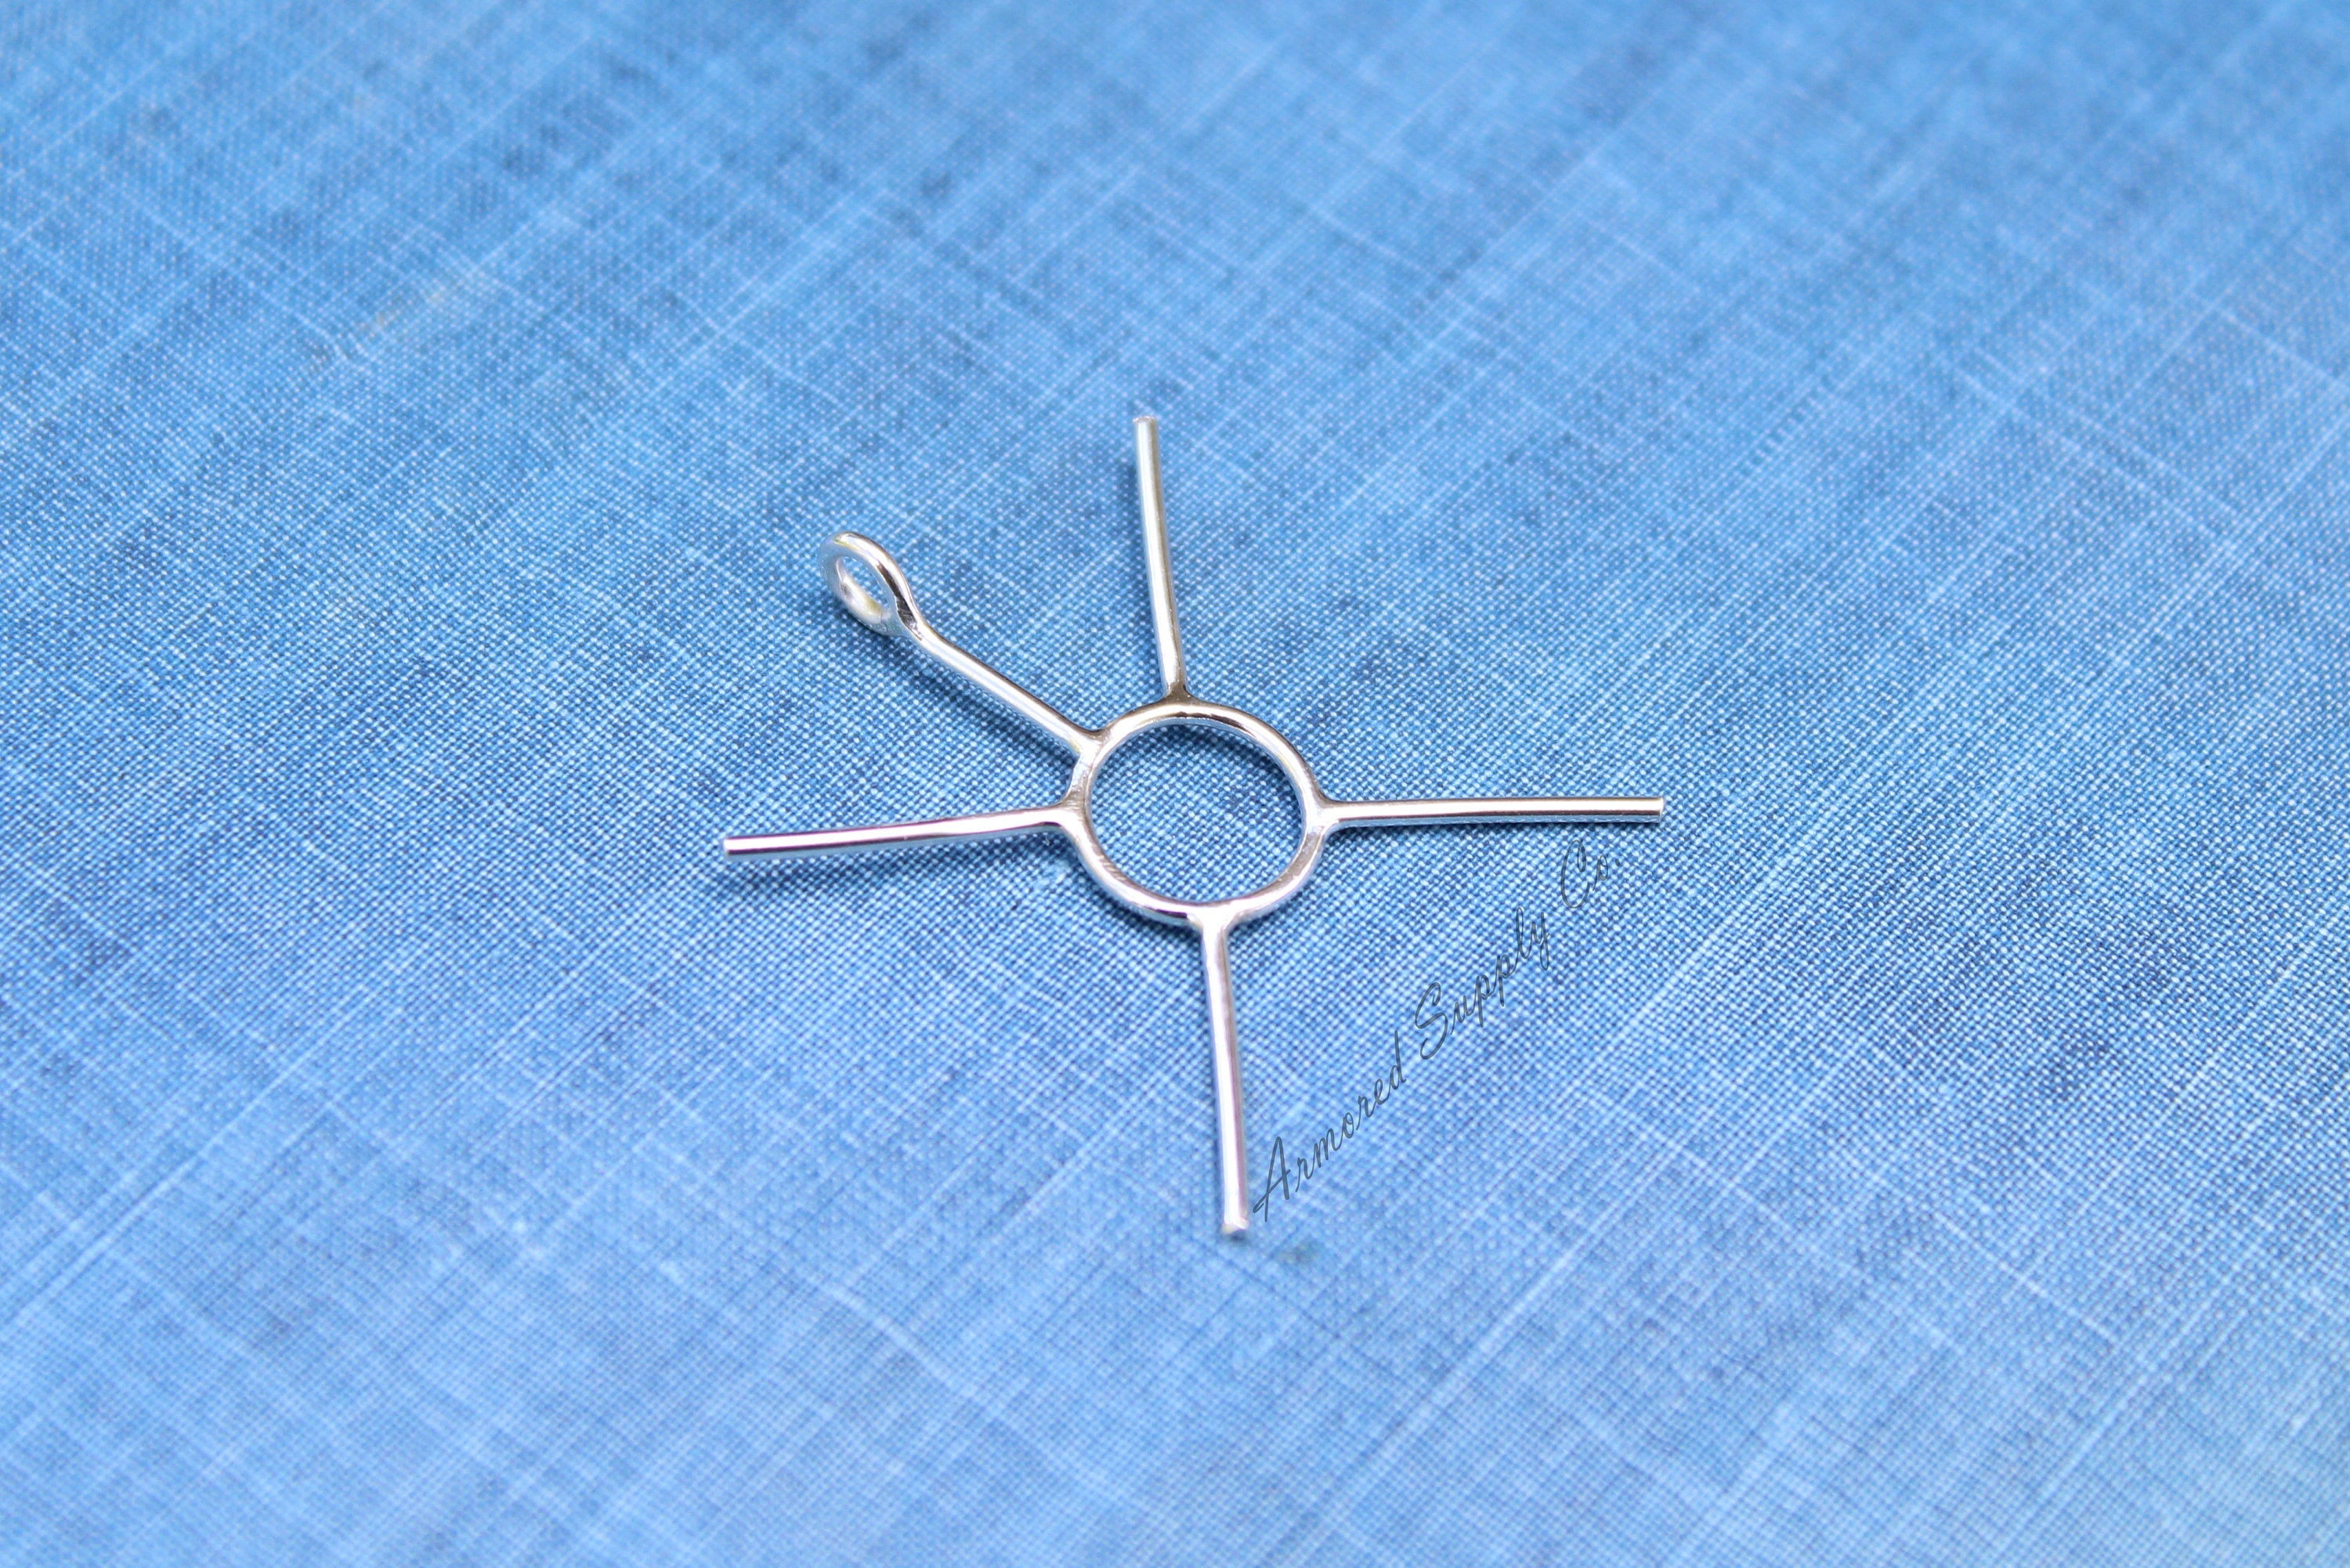 Silver Freeform Claw Prong Raw Stone Pendant Blank, Silver 4 Prong, Wholesale Blanks, Pendant, DIY Jewelry, Silver Blanks, Jewelry Supplies